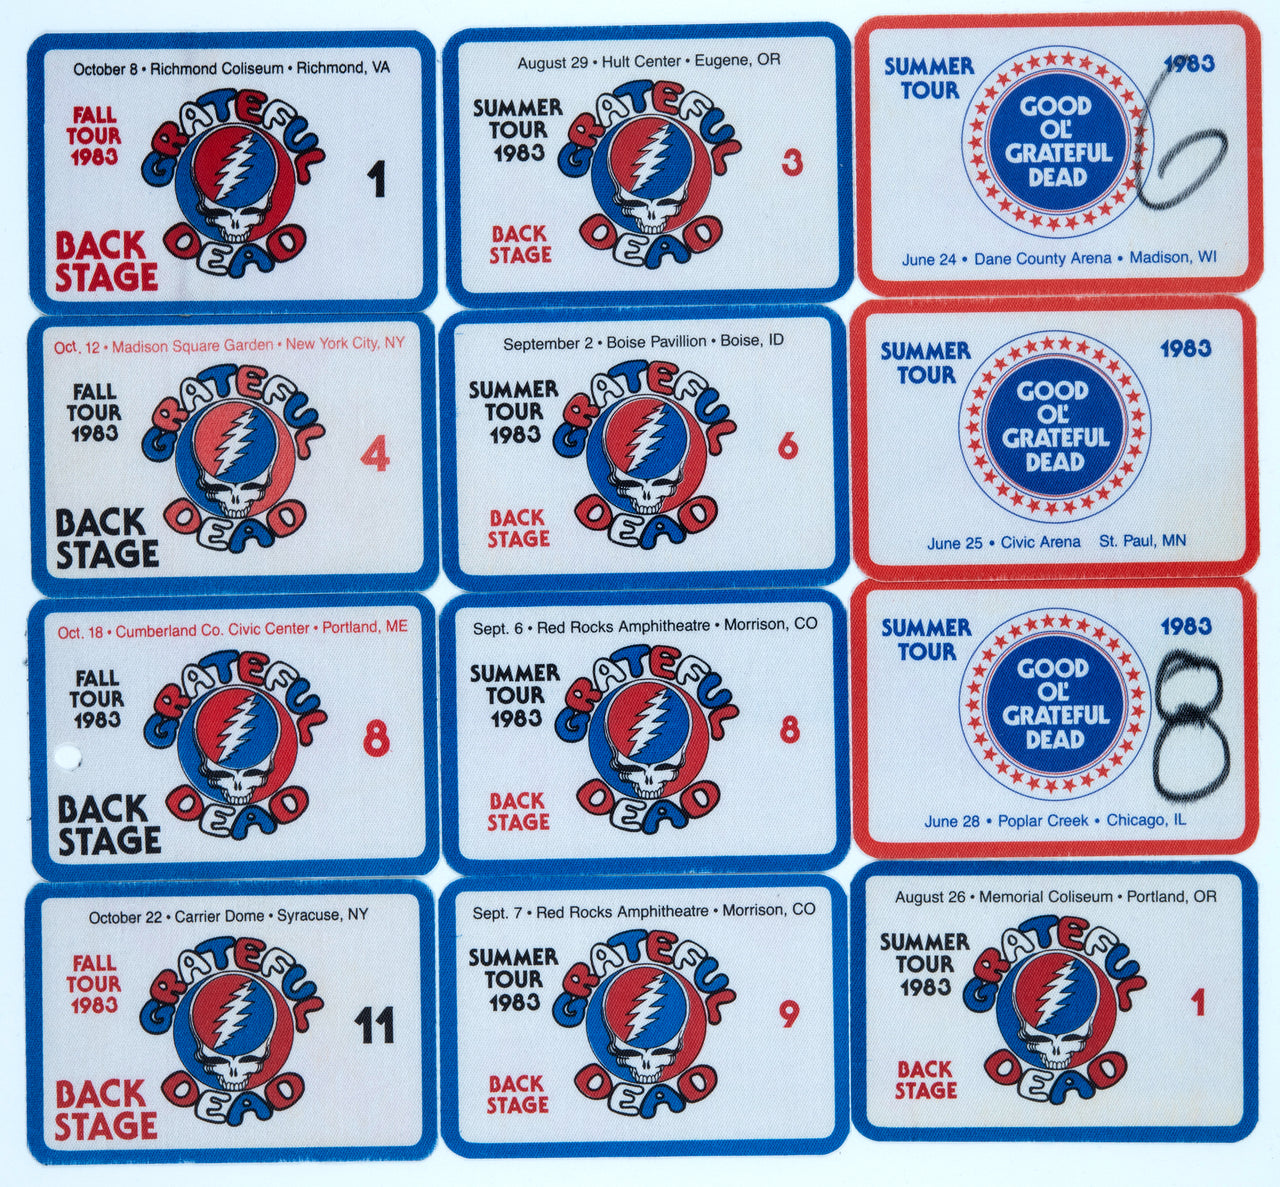 Grateful Dead Backstage Passes (6/24/1983 - 10/22/1983) from Dan Healy